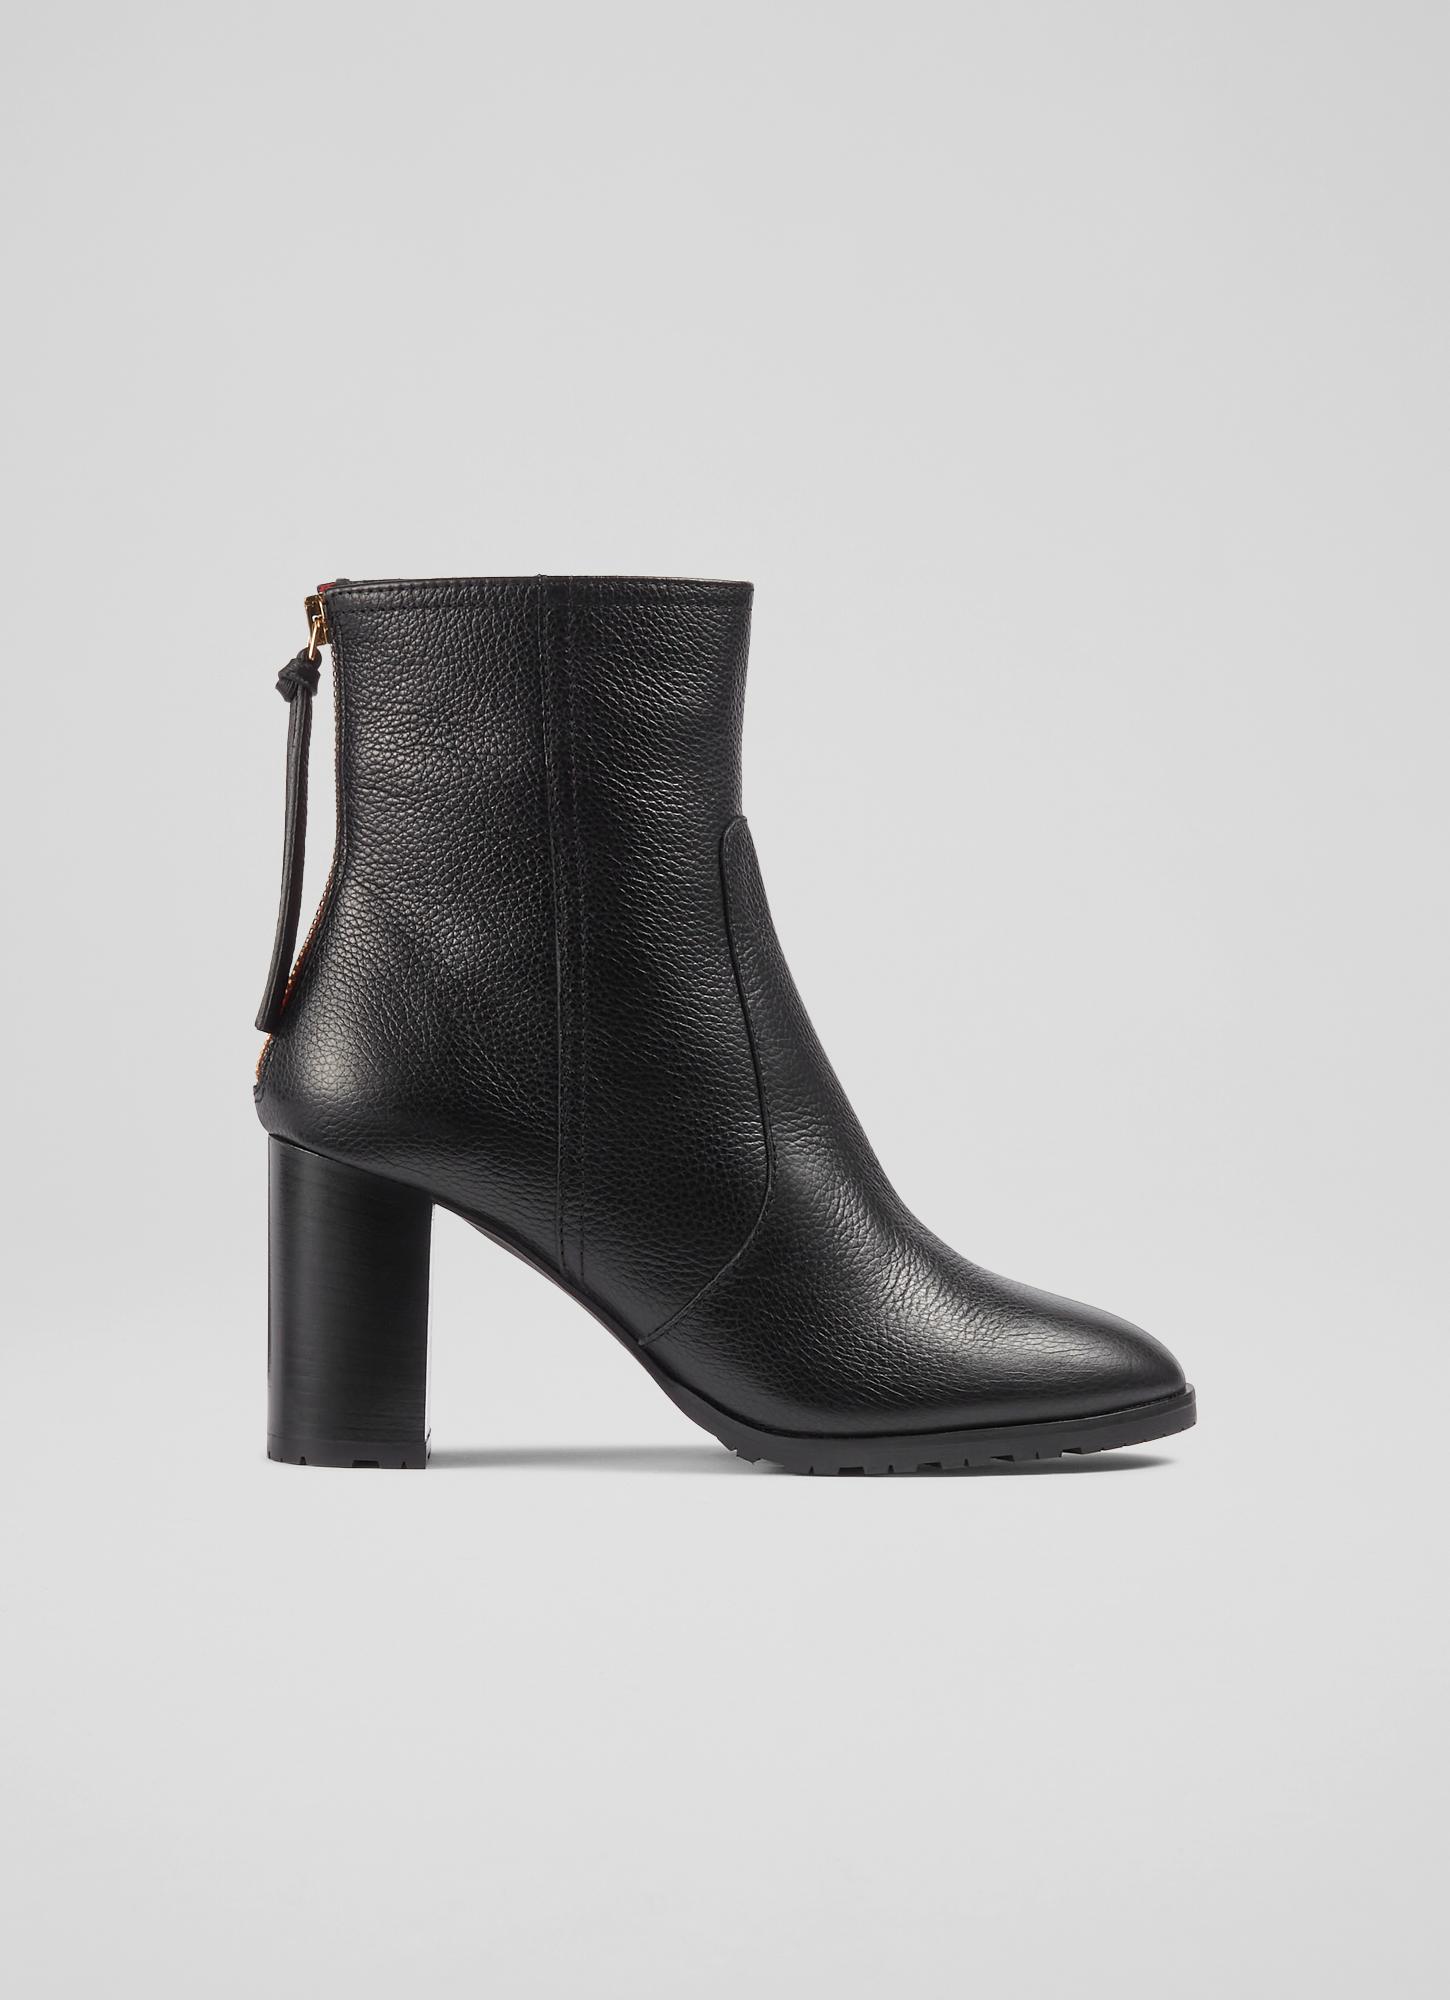 Nora Black Grainy Leather Ankle Boots, Black